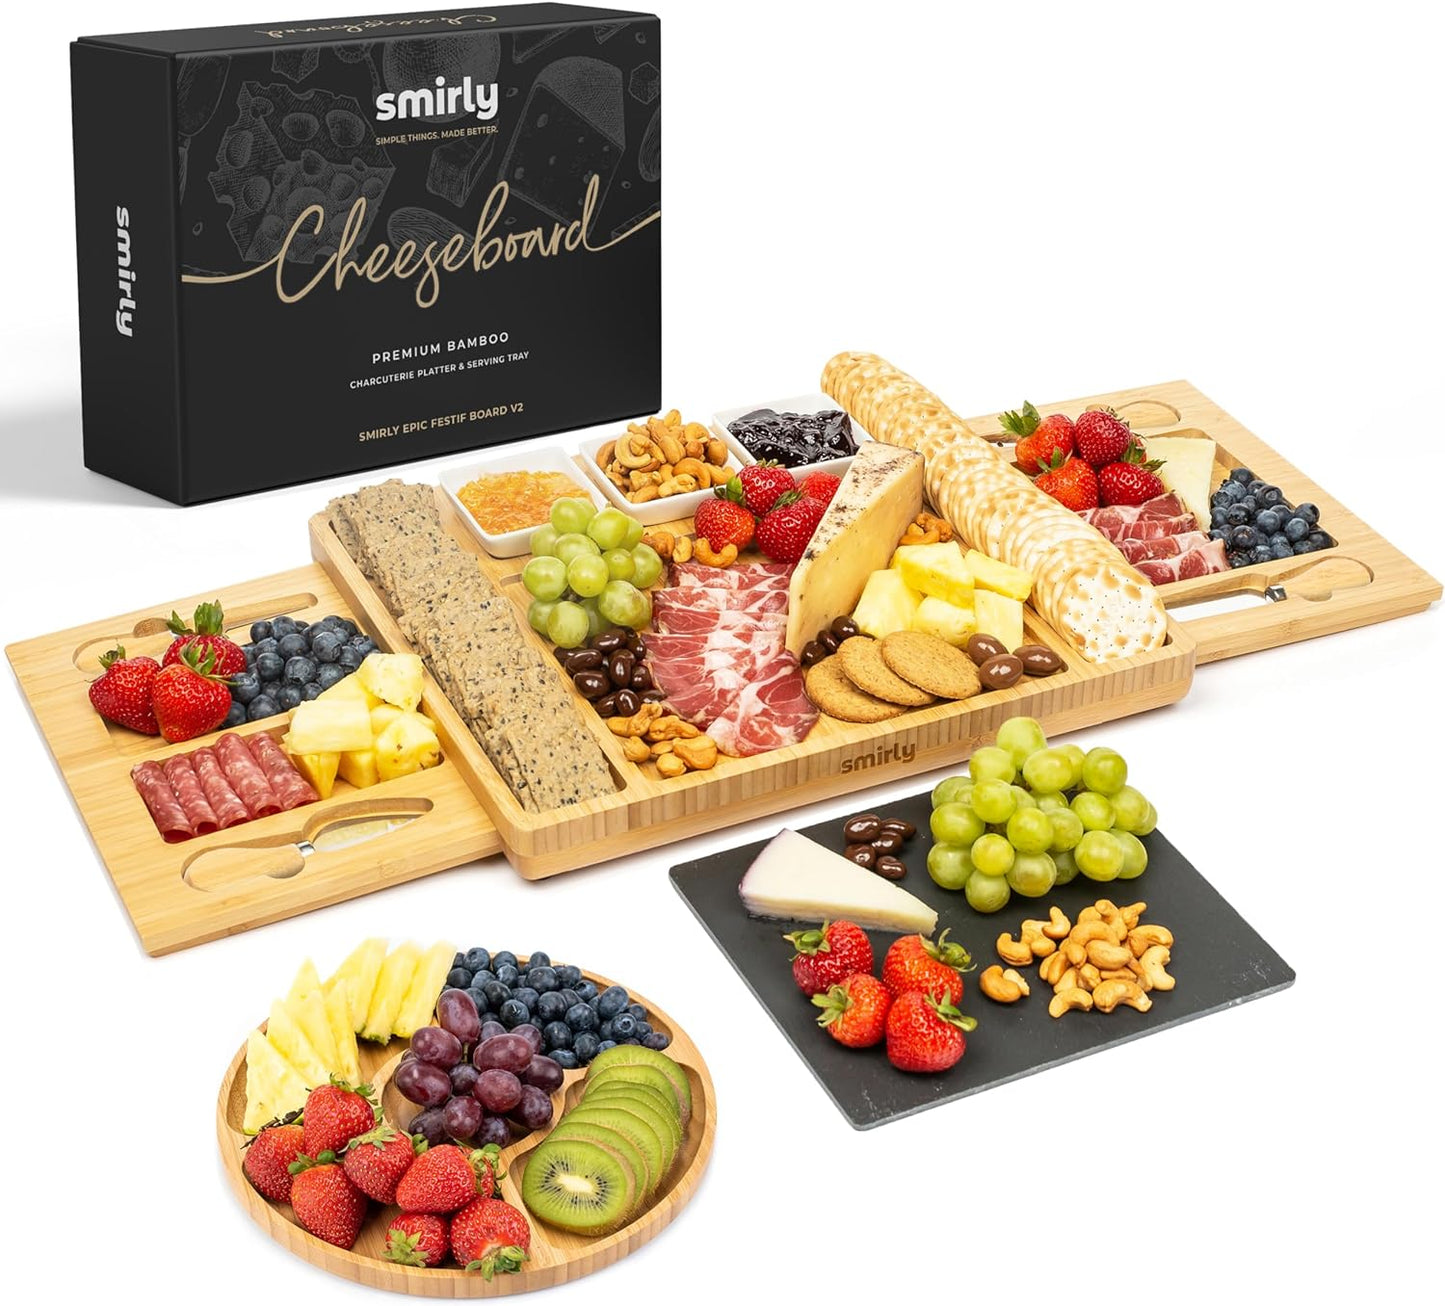 Charcuterie Board Gift Set: Large Bamboo Cheese Board - Unique Mother's Day, Housewarming, Wedding, Bridal Shower Present